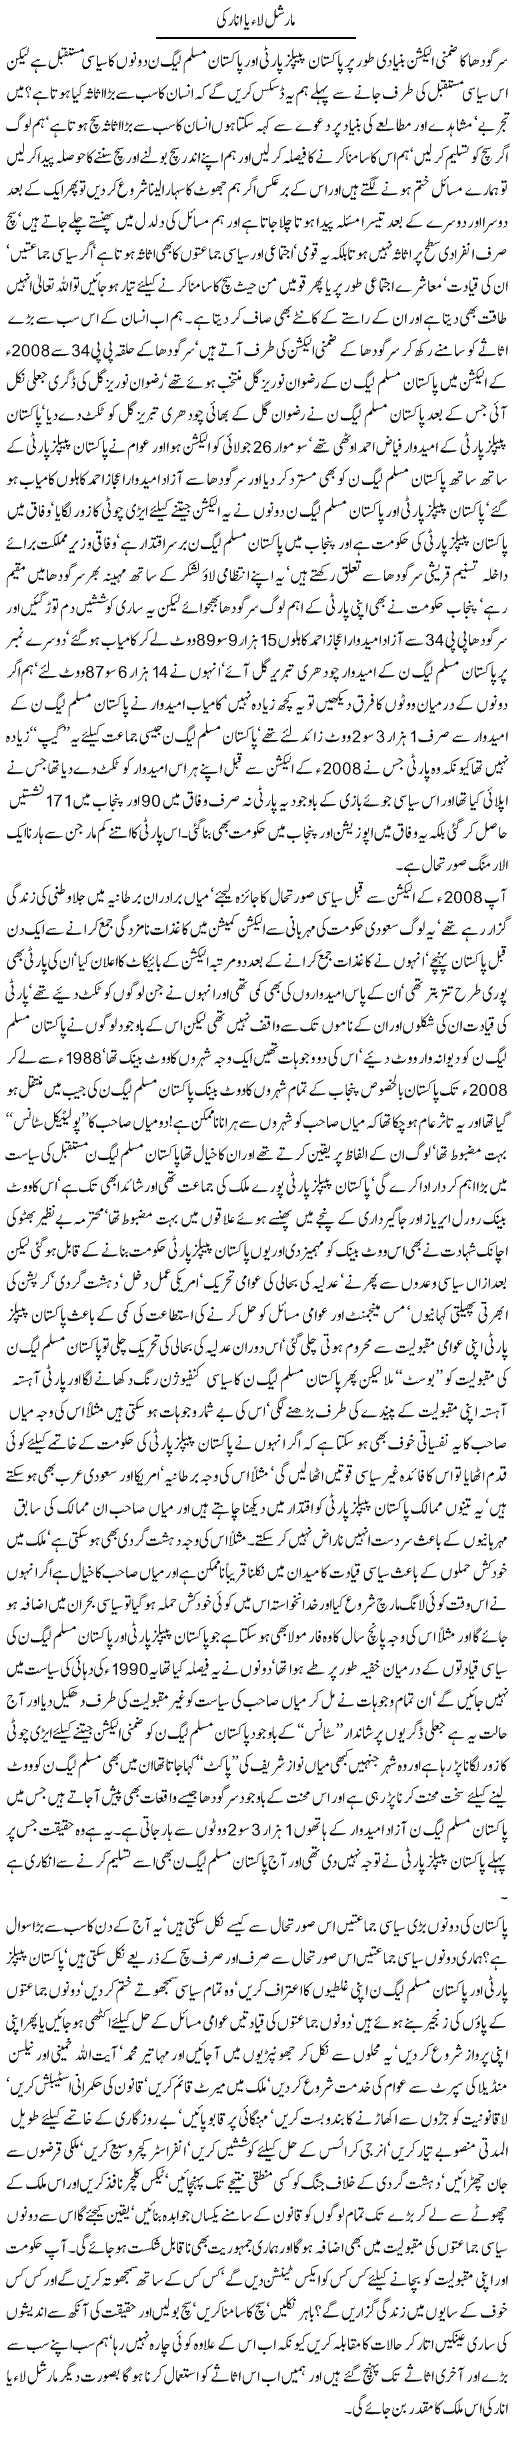 Marshal Law Express Column Javed Chaudhry 29 July 2010